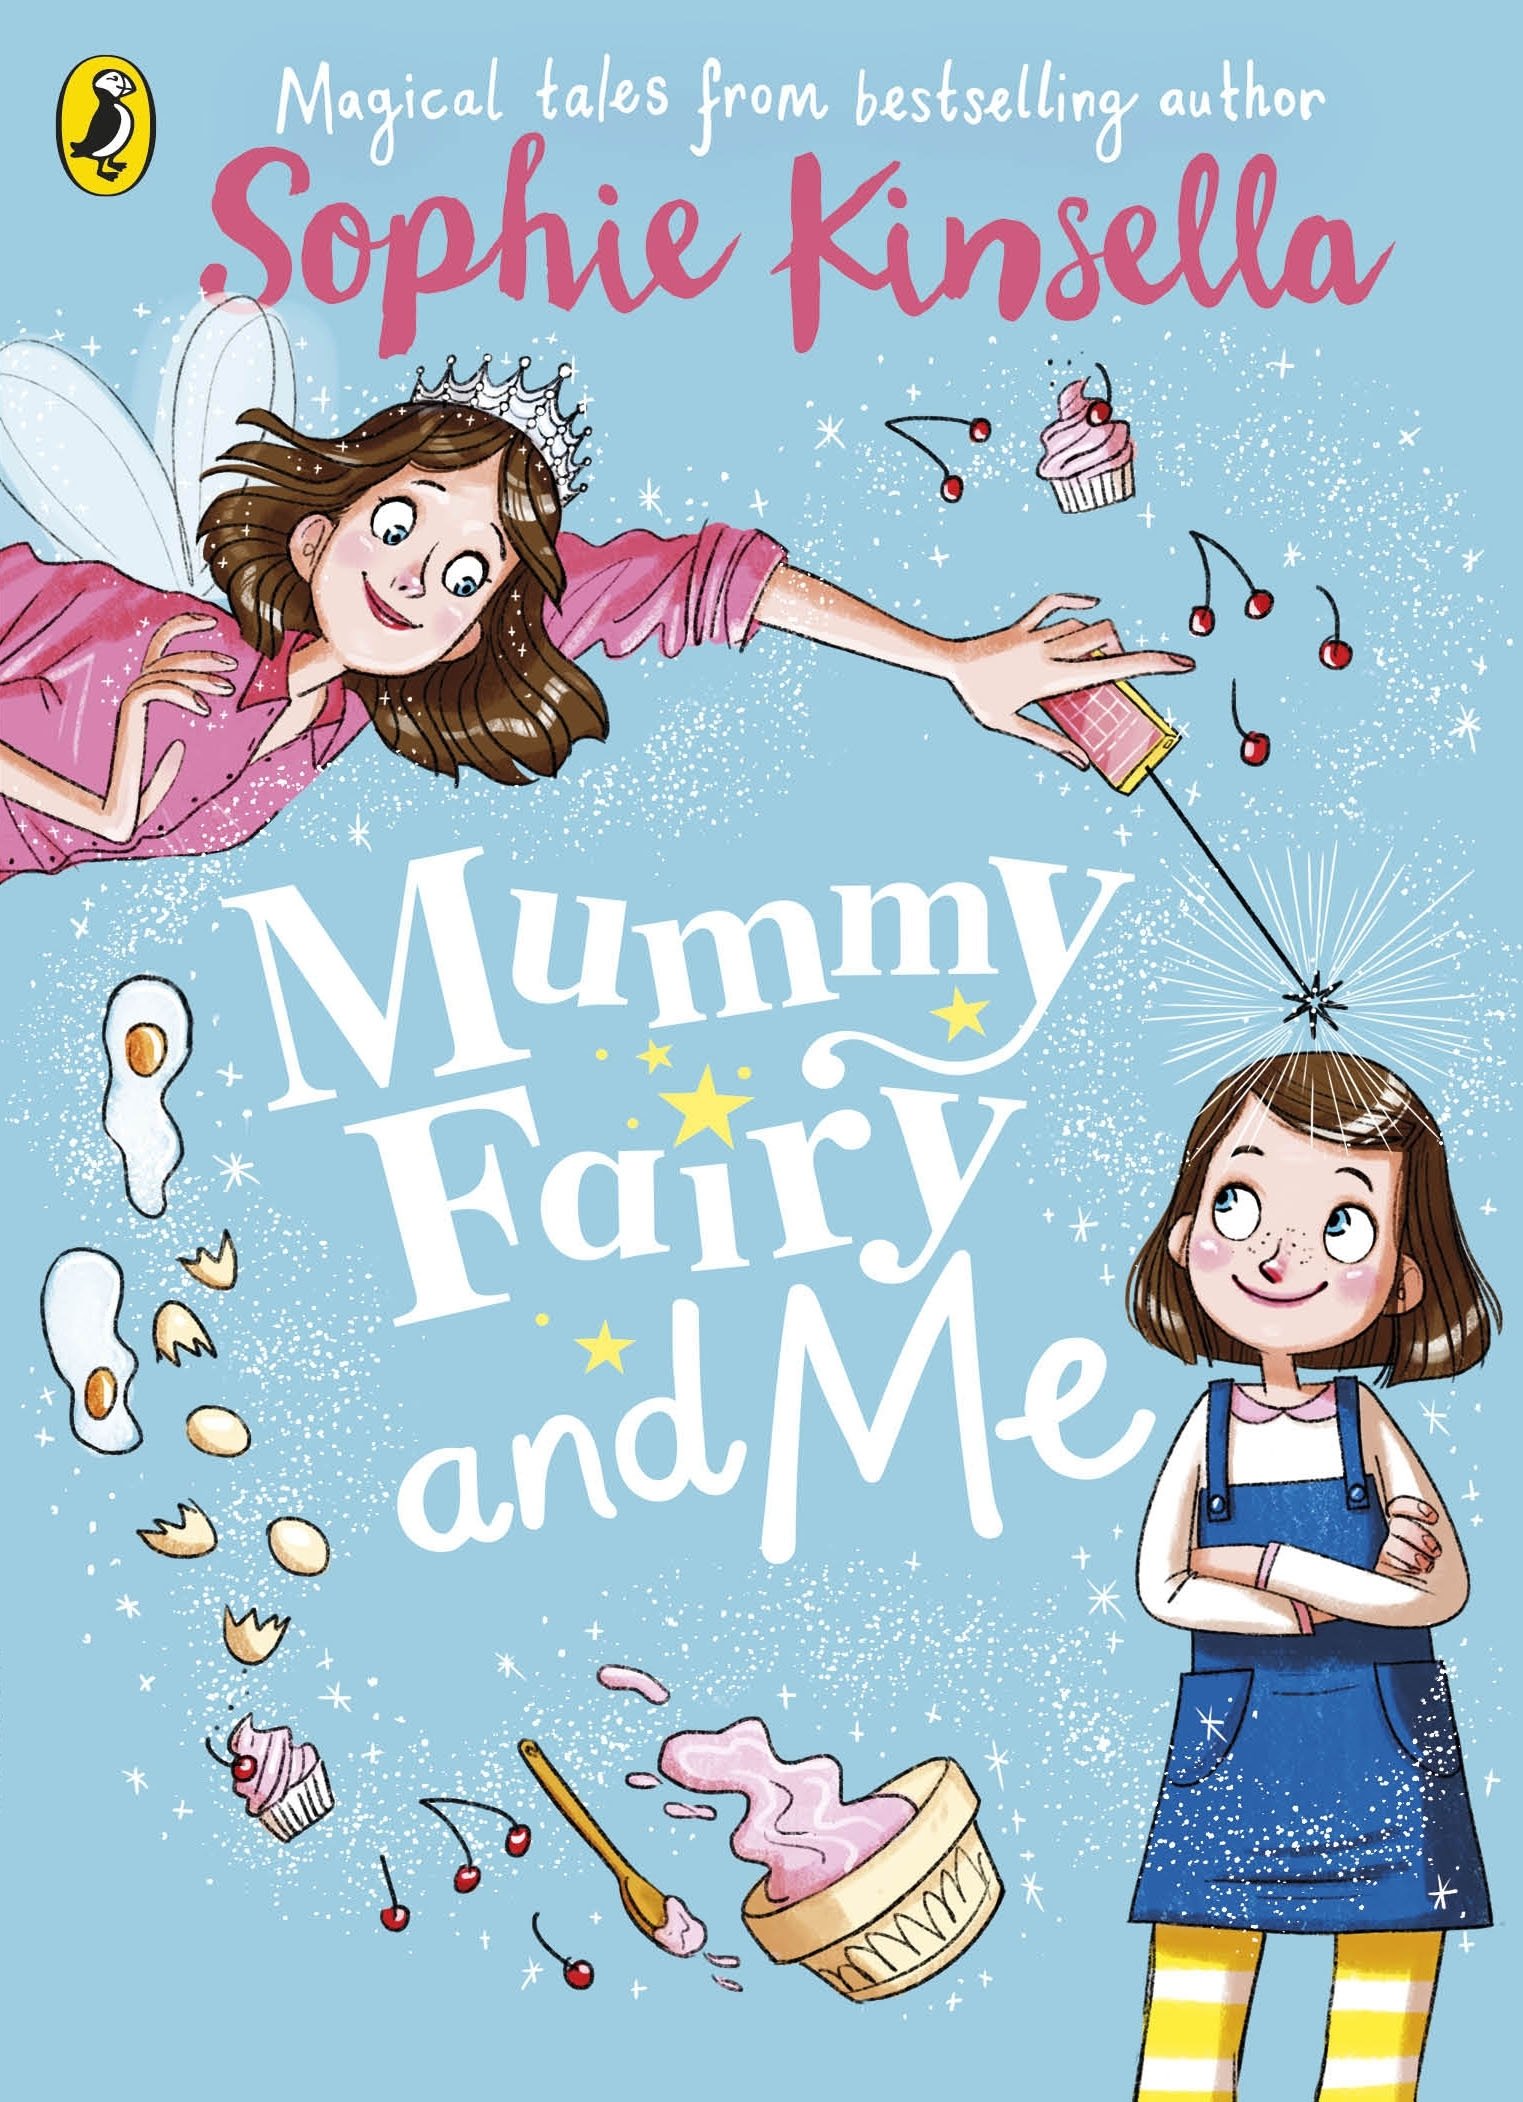 Mummy Fairy and Me | Sophie Kinsella